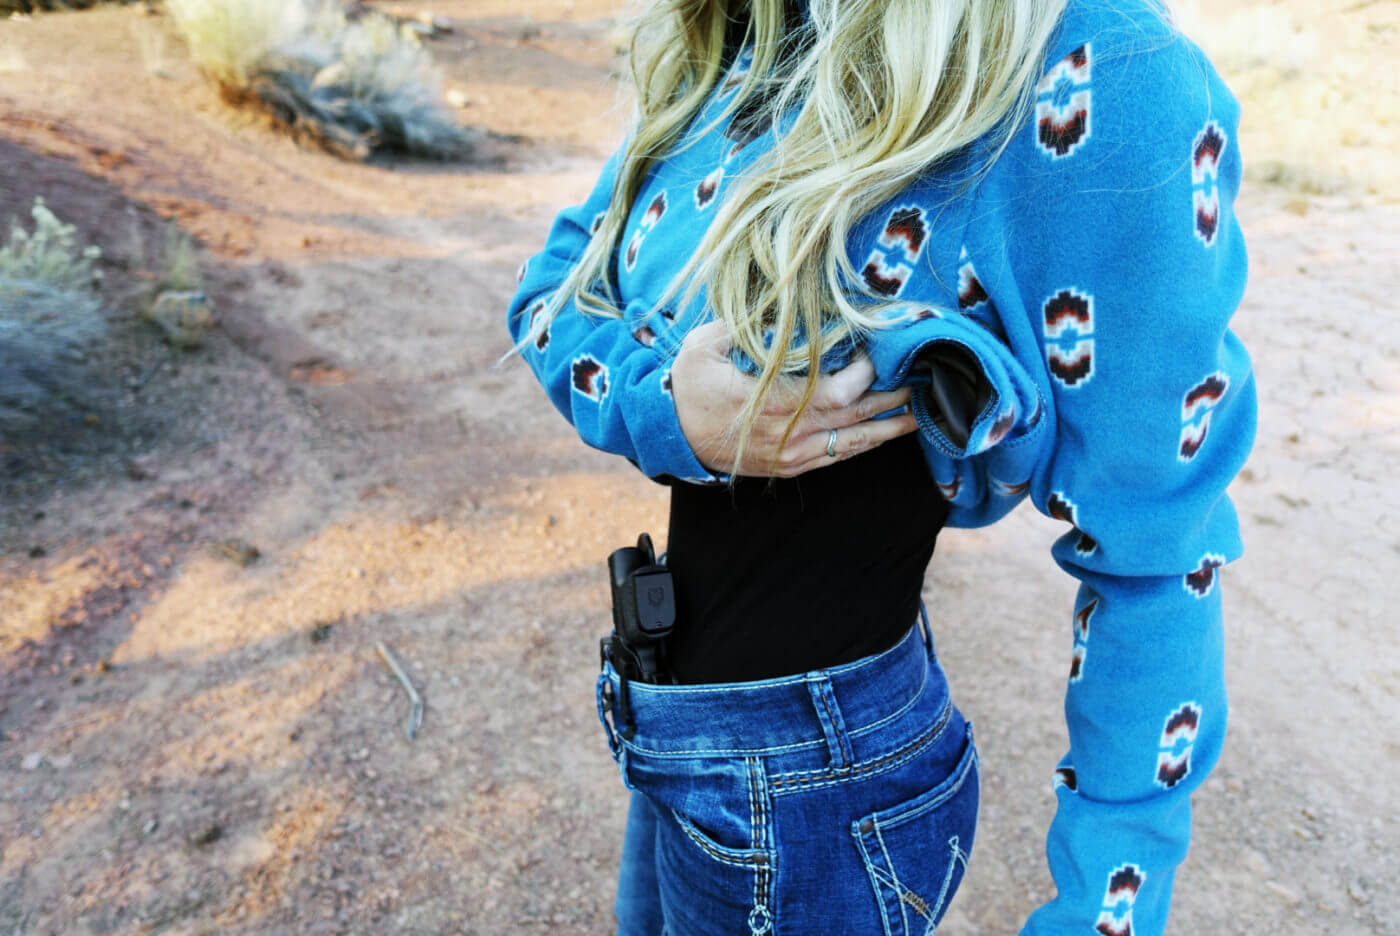 Best Ways for a Woman to Conceal Carry Her Hellcat - The Armory Life